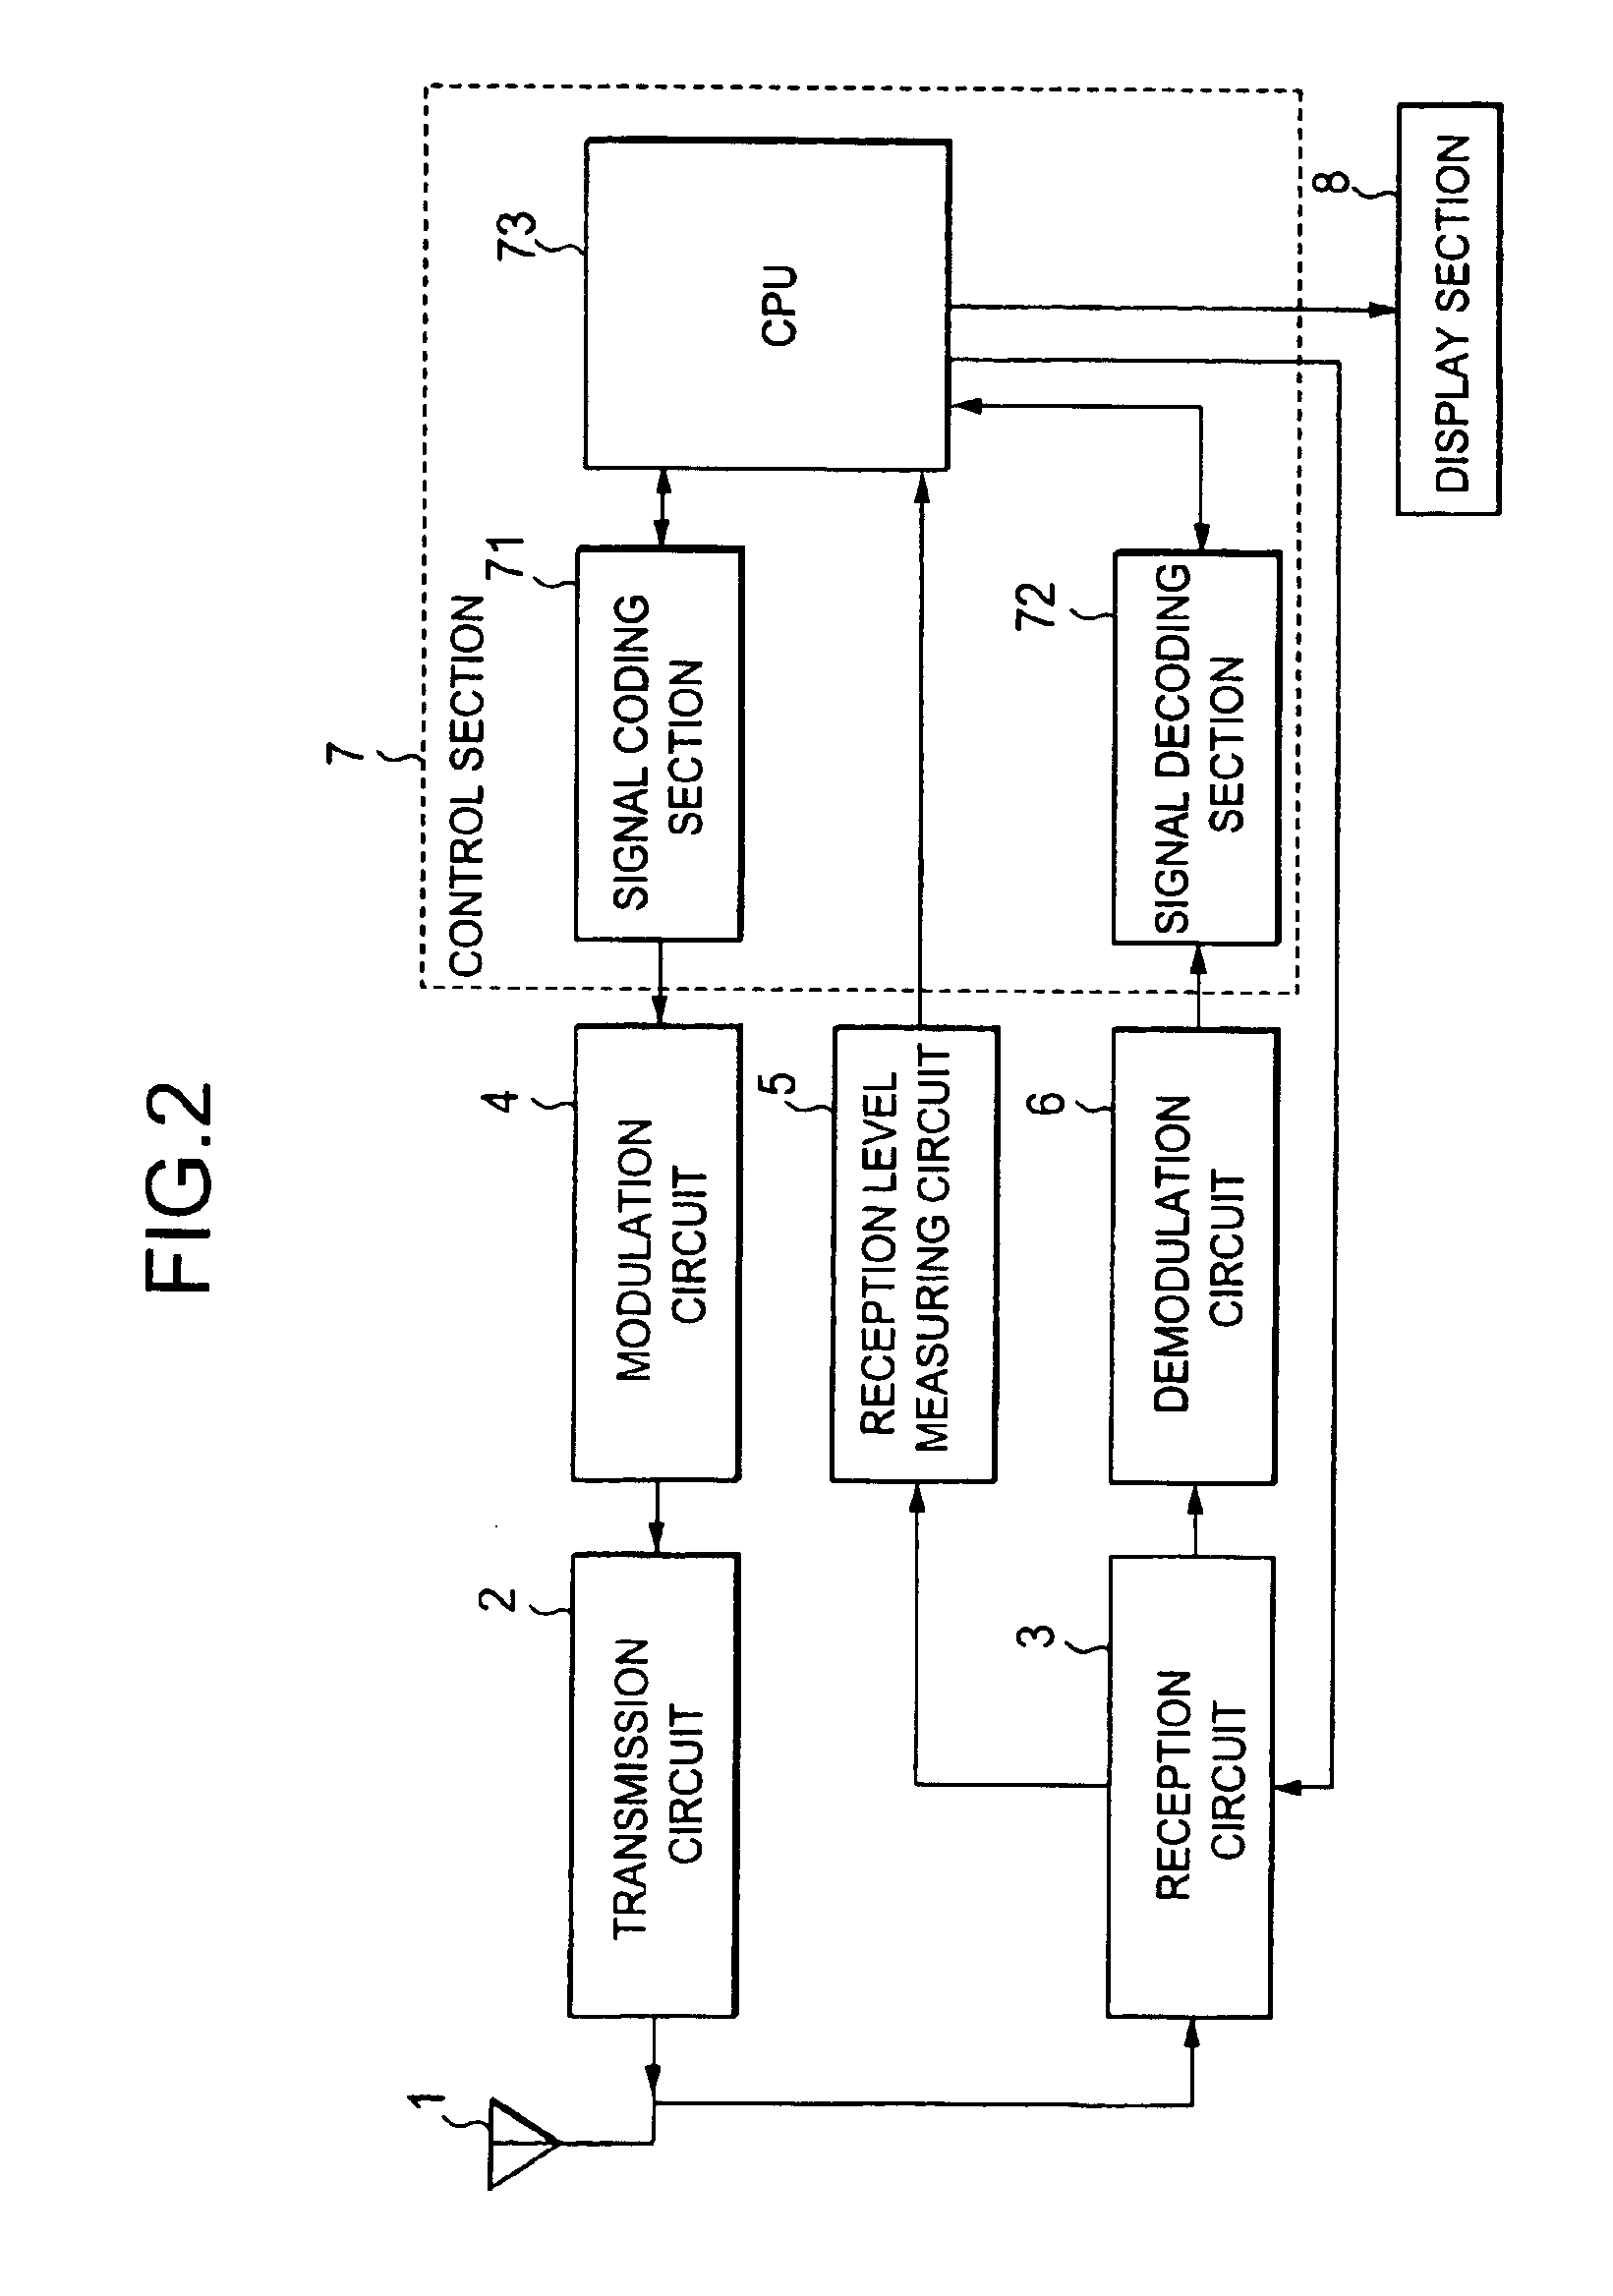 Portable telephone with moving status detection function